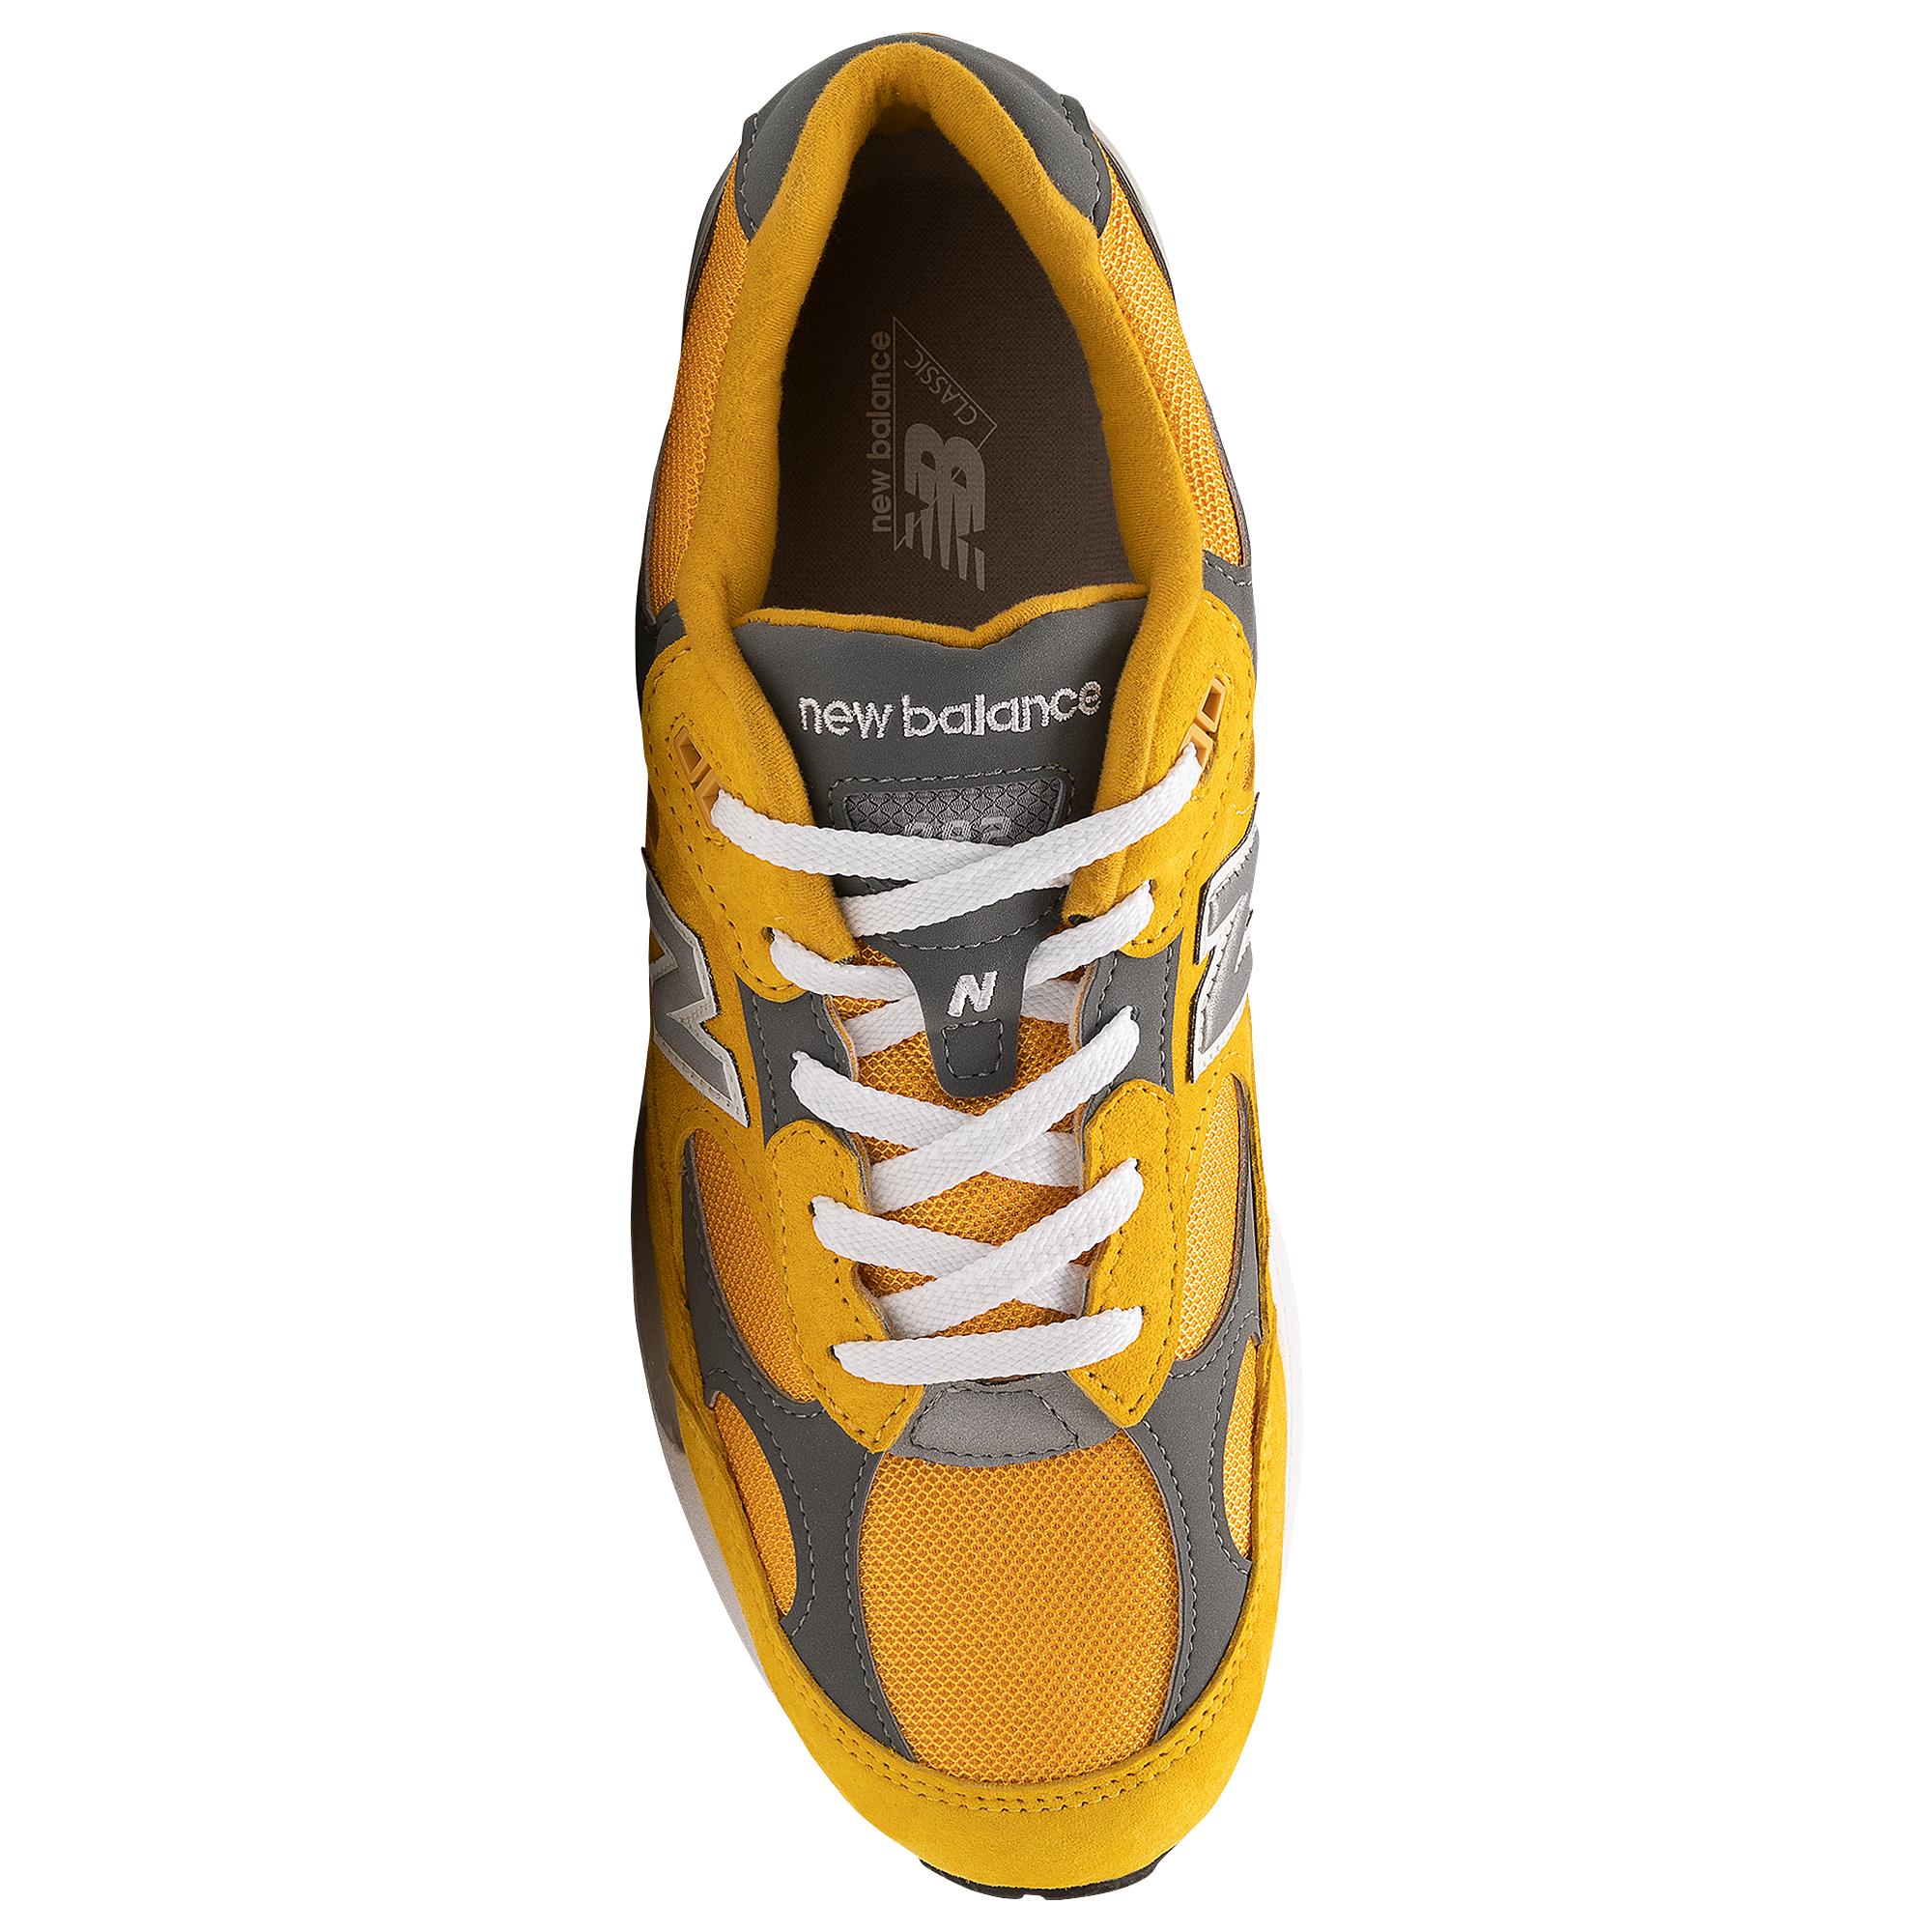 New Balance Suede 992 - Running Shoes in Yellow/Grey/White (Yellow 